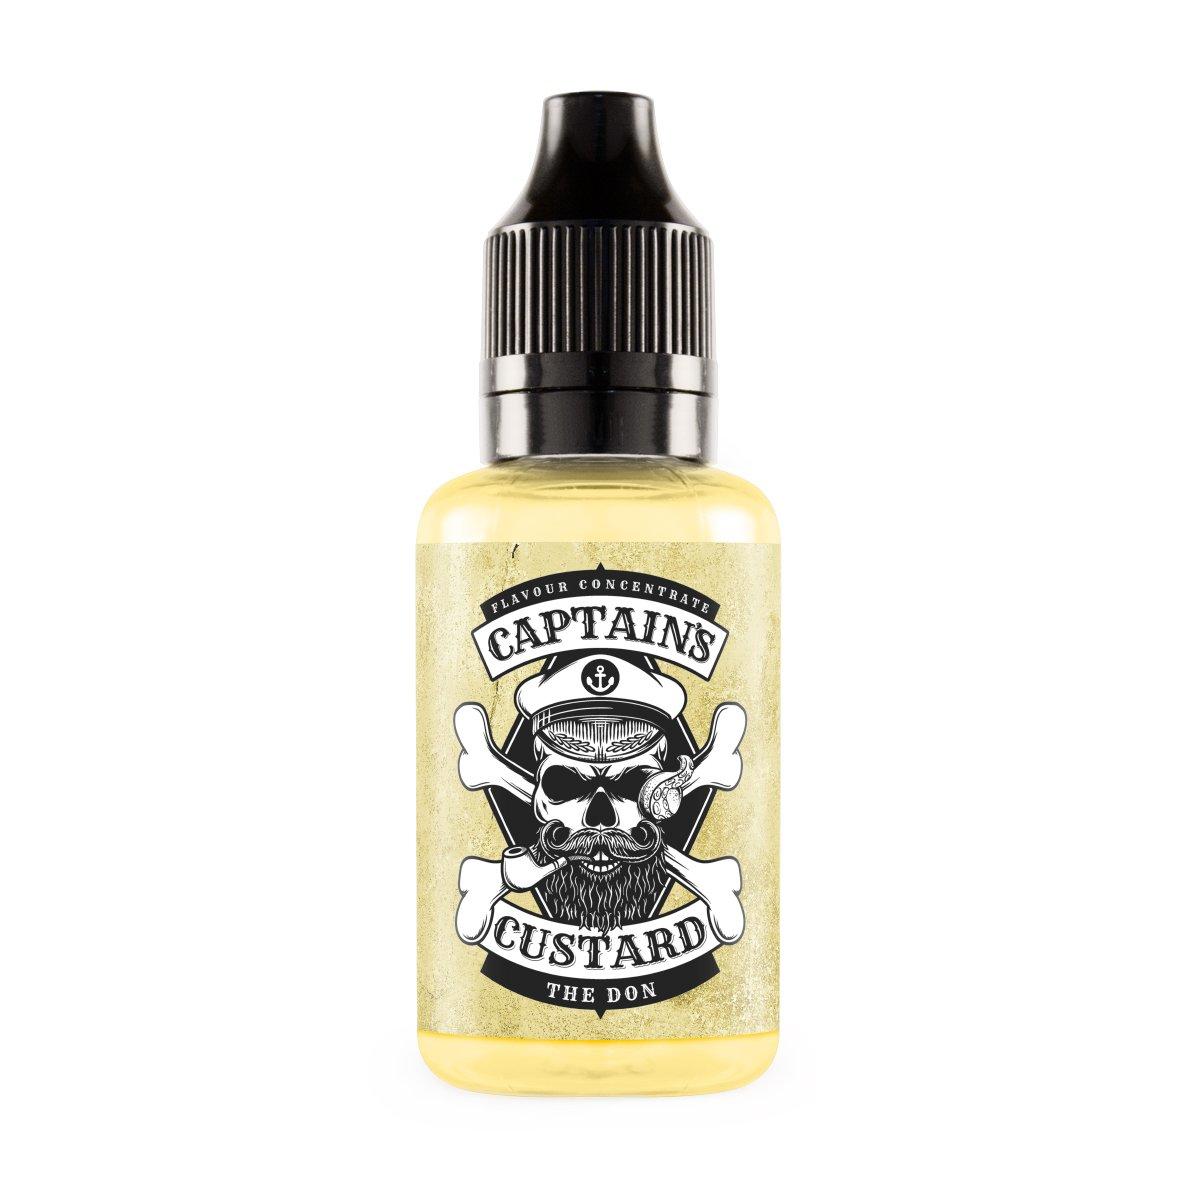 The Don Flavour Concentrate by Captains Custard